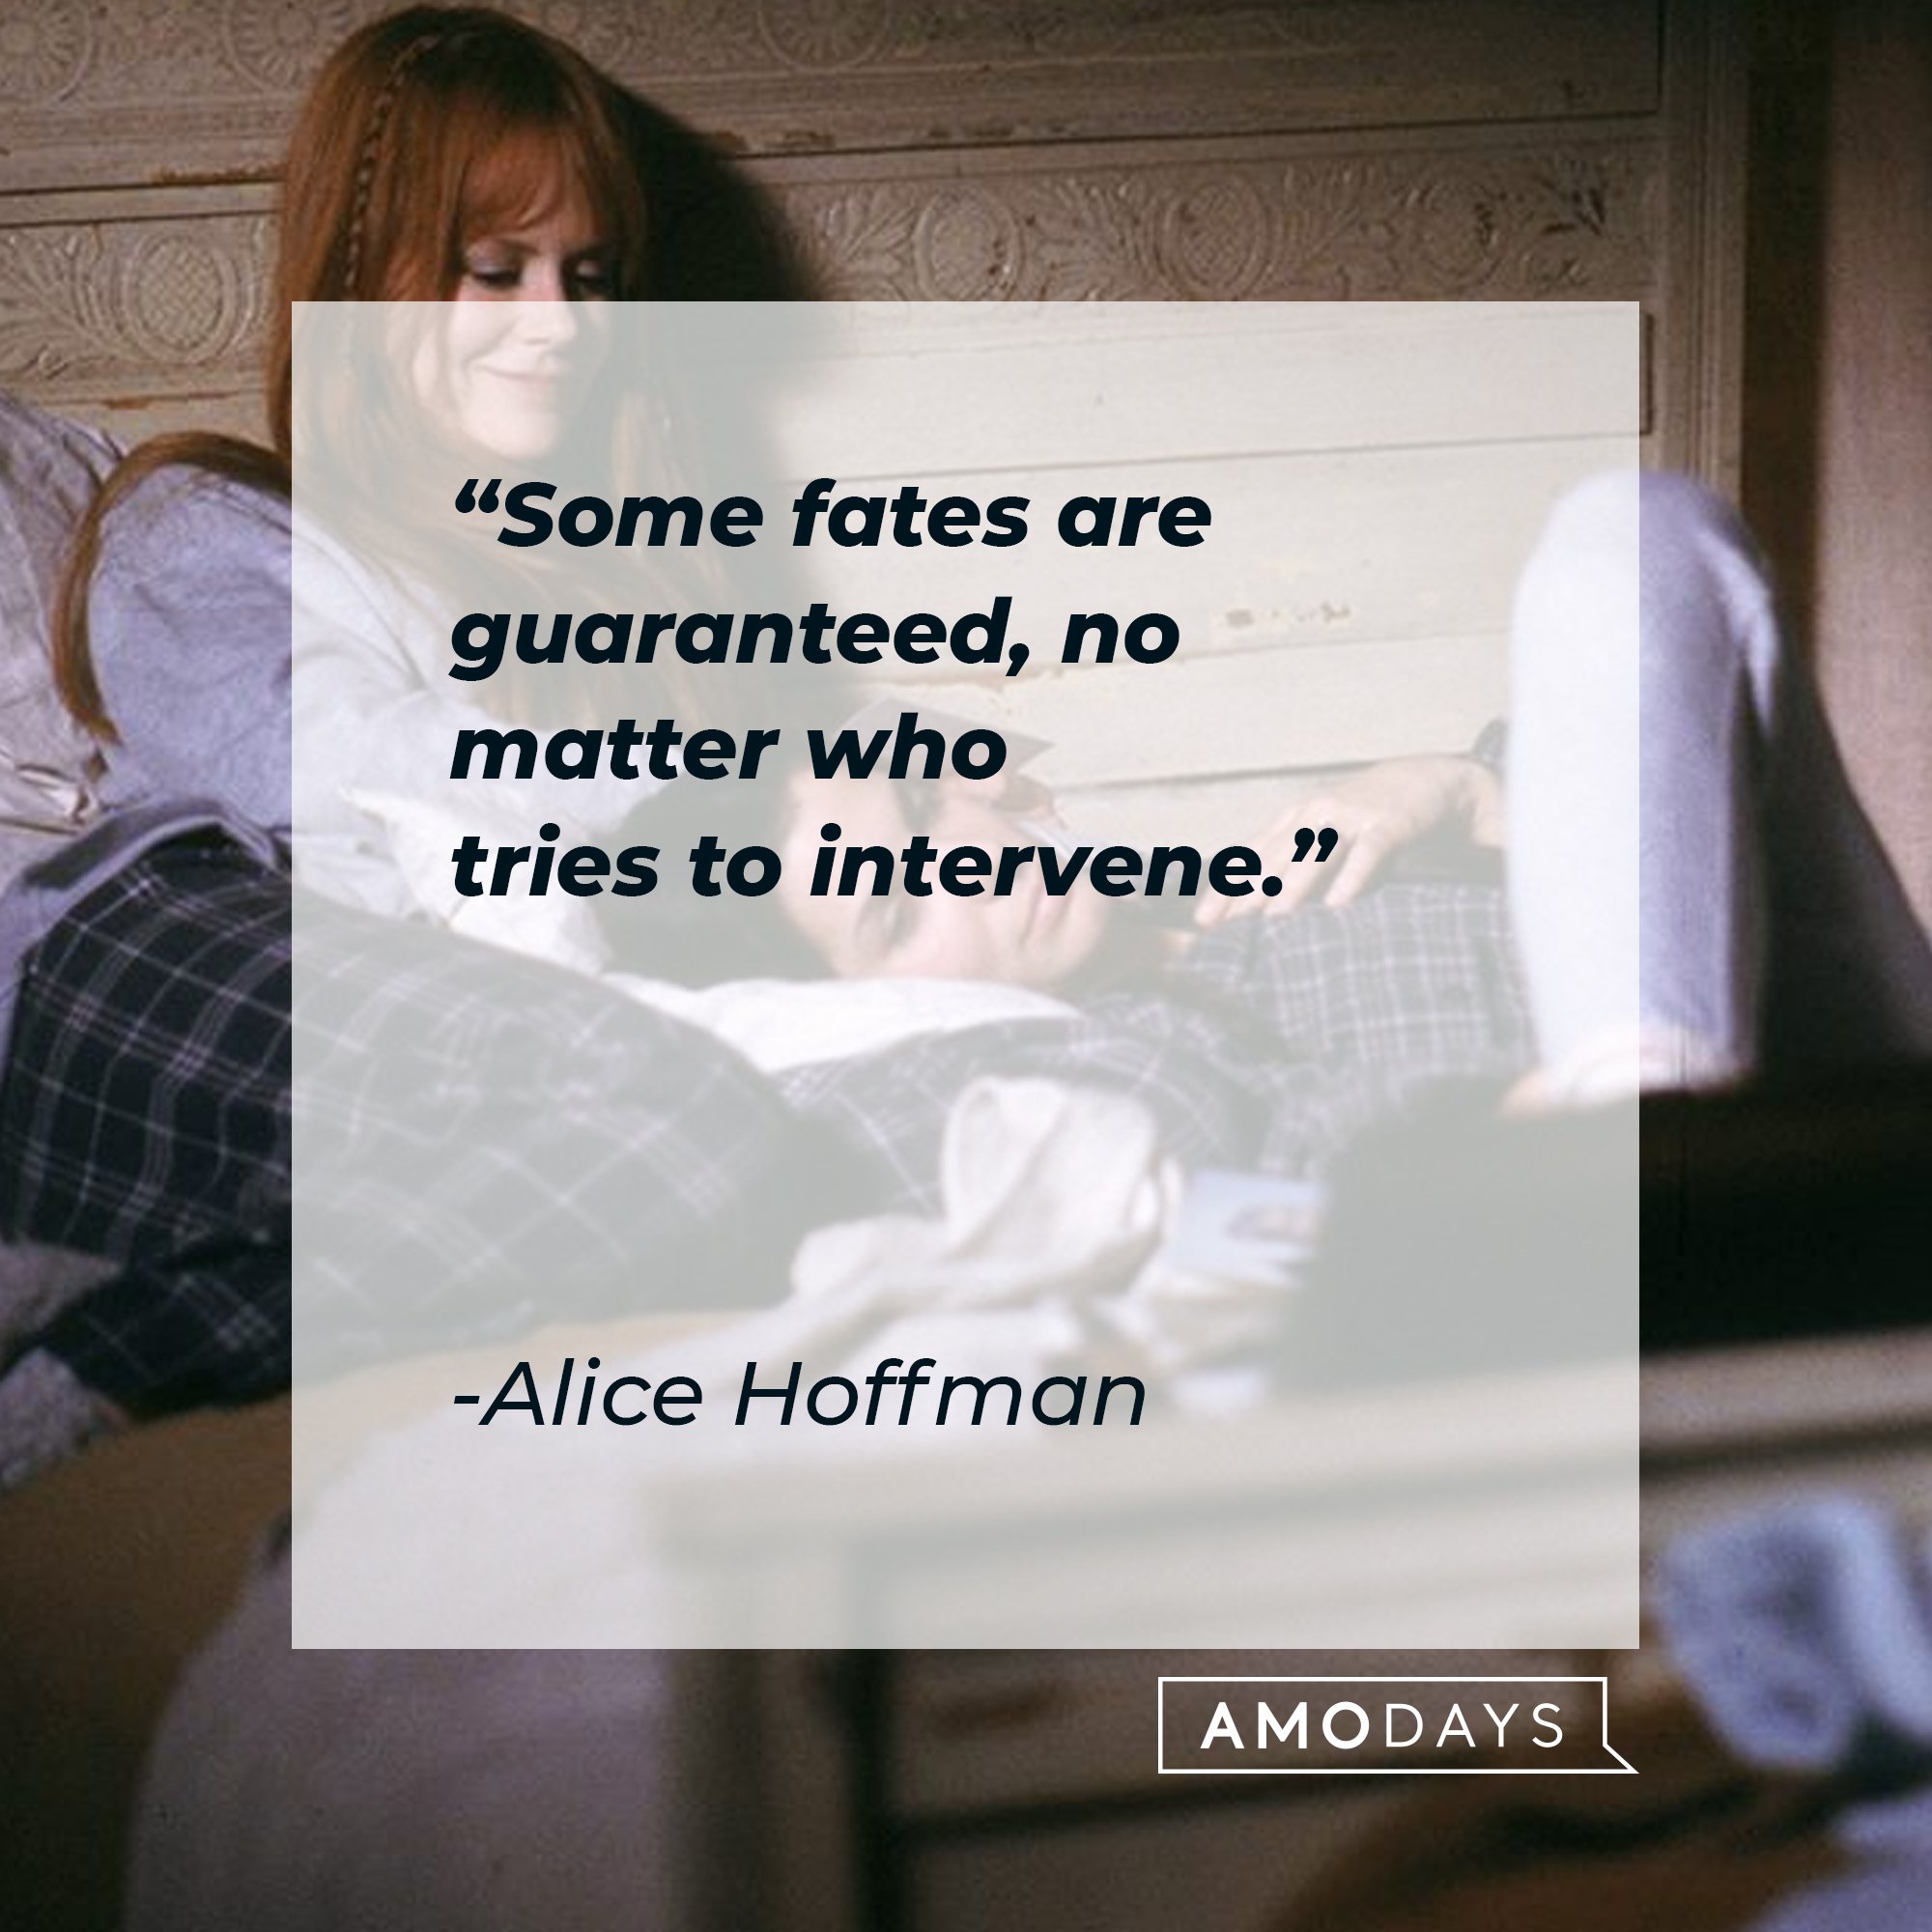   Alice Hoffman’s quote: "Some fates are guaranteed, no matter who tries to intervene." | Image: AmoDays